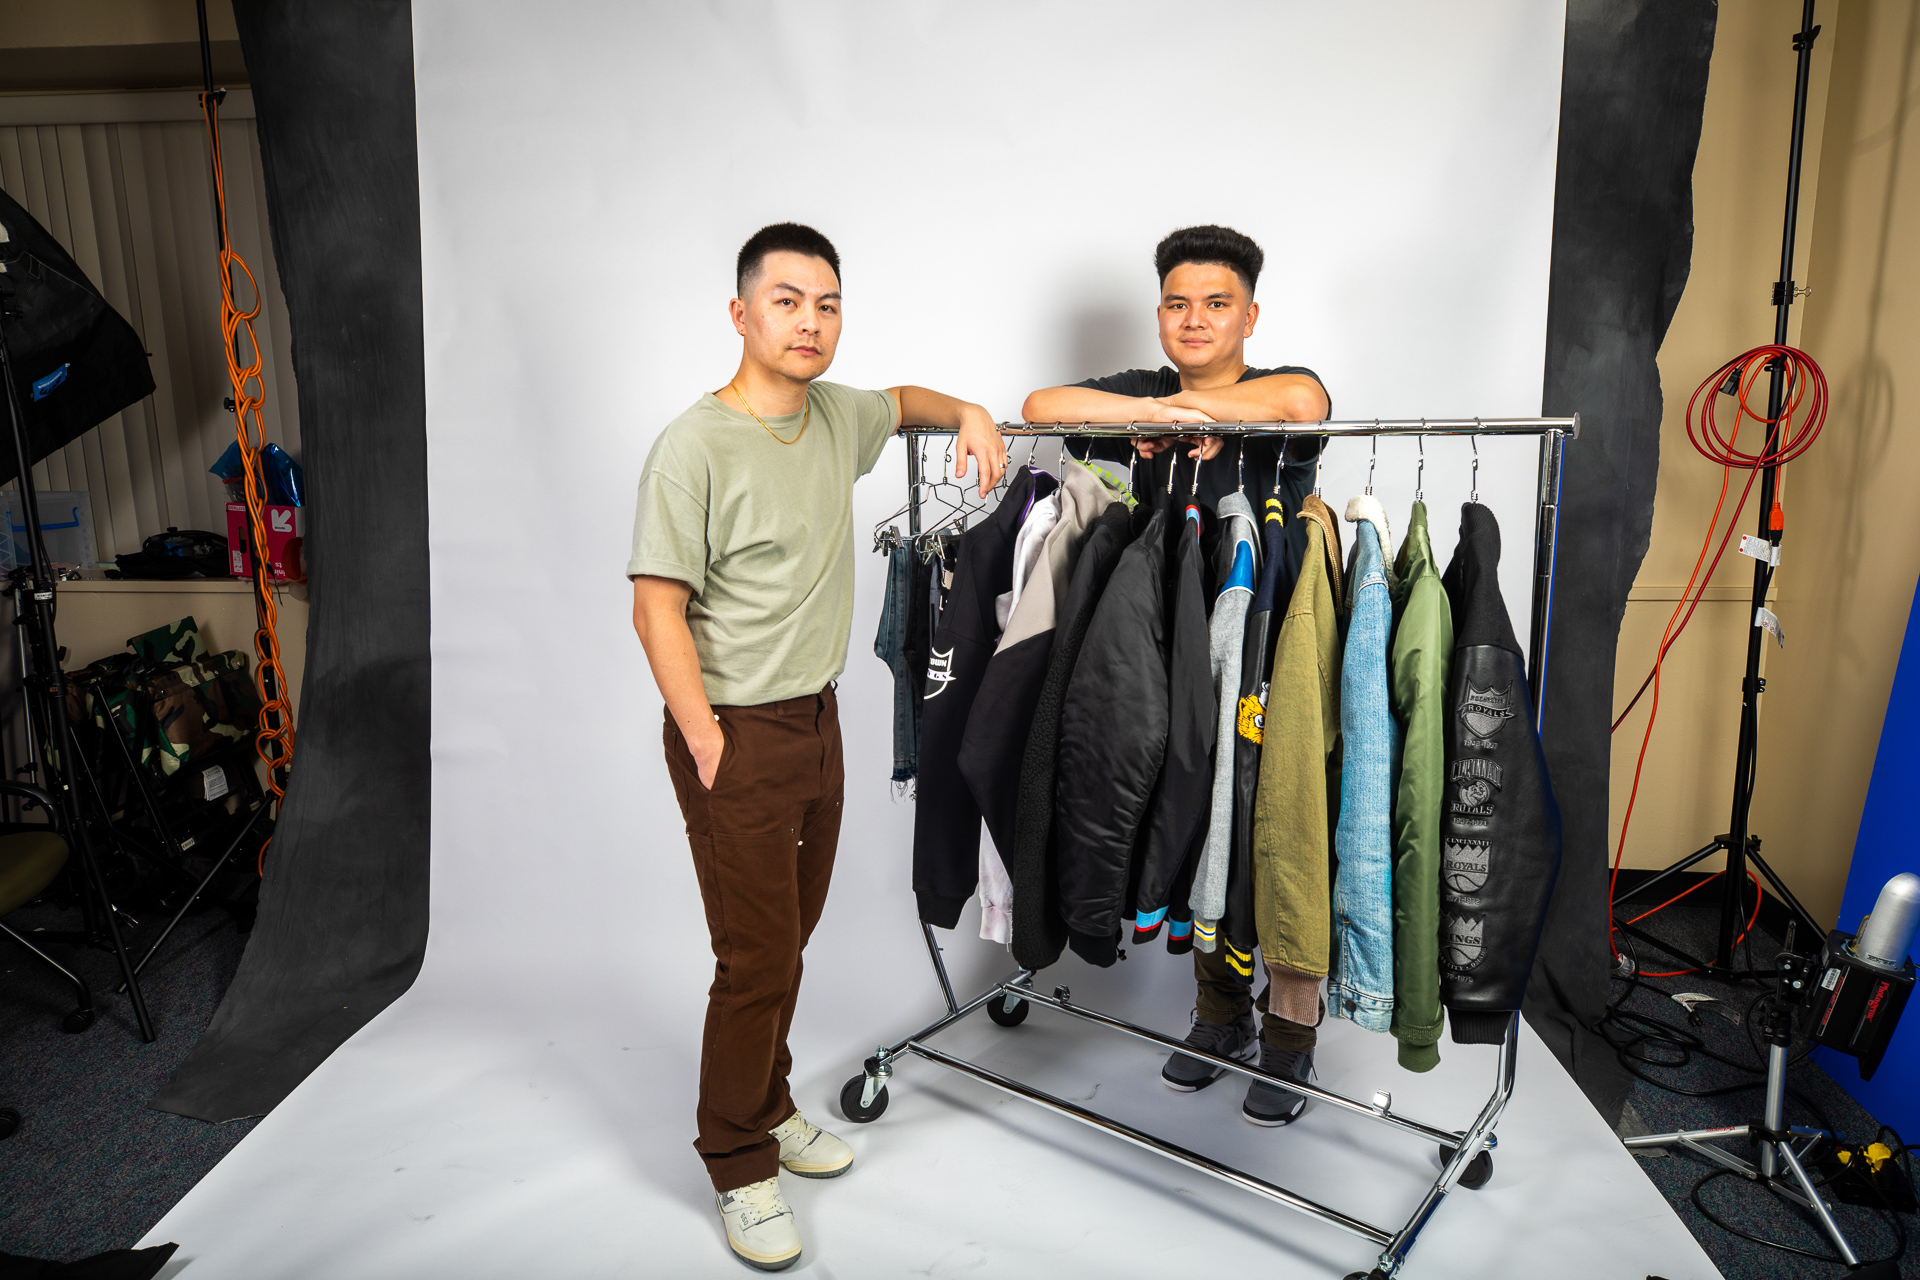 Jason Vu (left), creator of men's clothing line AUTHMADE, poses with a clothing rack full of NBA-themed fashion apparel items created as part of his brand.